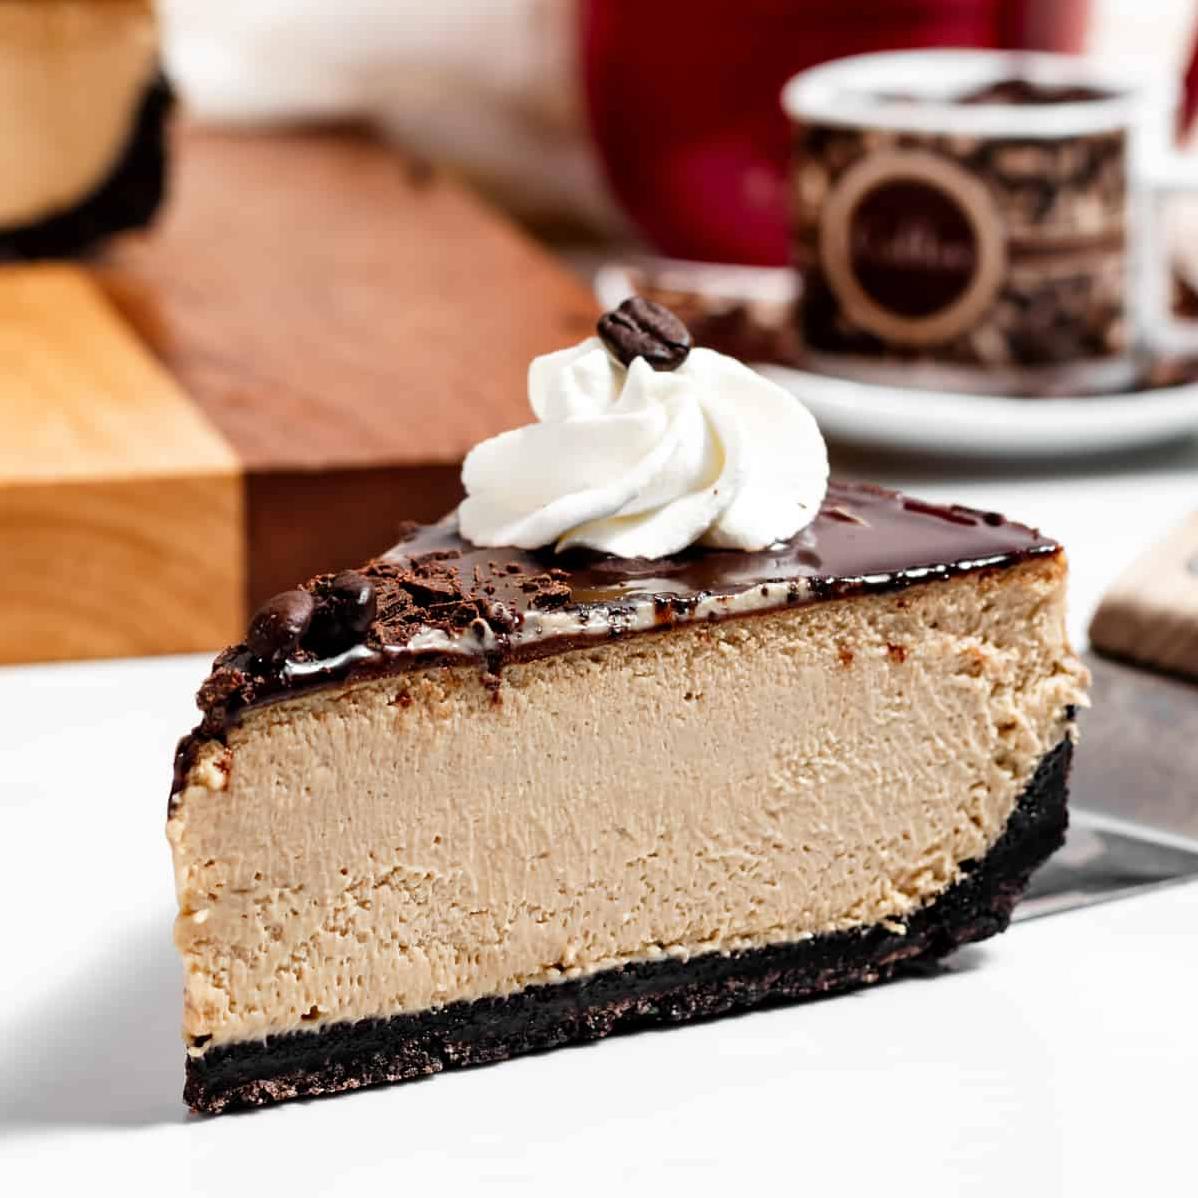  Trust me, this cheesecake will make your taste buds do a happy dance.